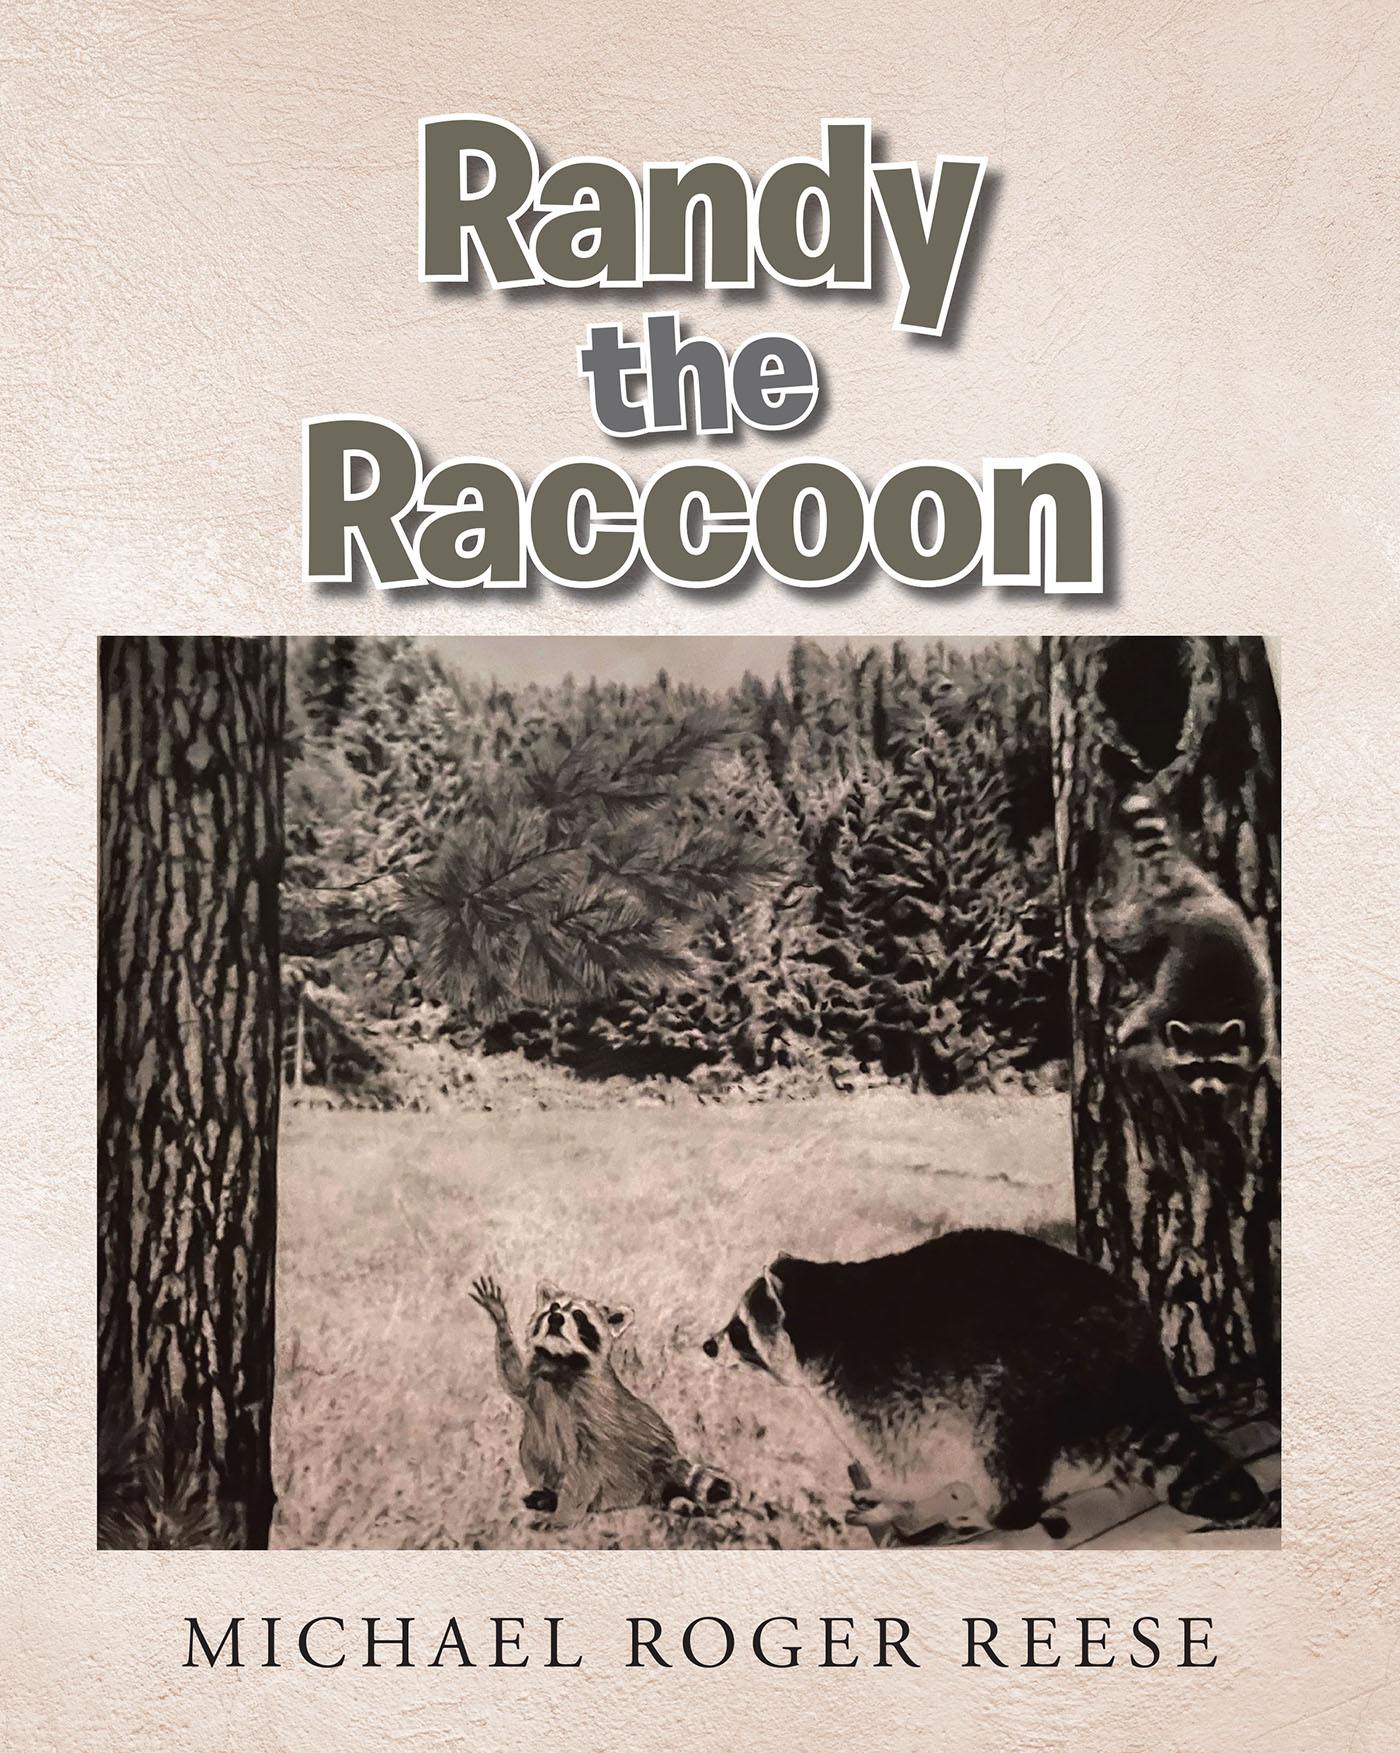 Michael Roger Reese’s Newly Released "Randy the Raccoon" is an Enjoyable Journey of Learning the Importance of Listening to One’s Parents